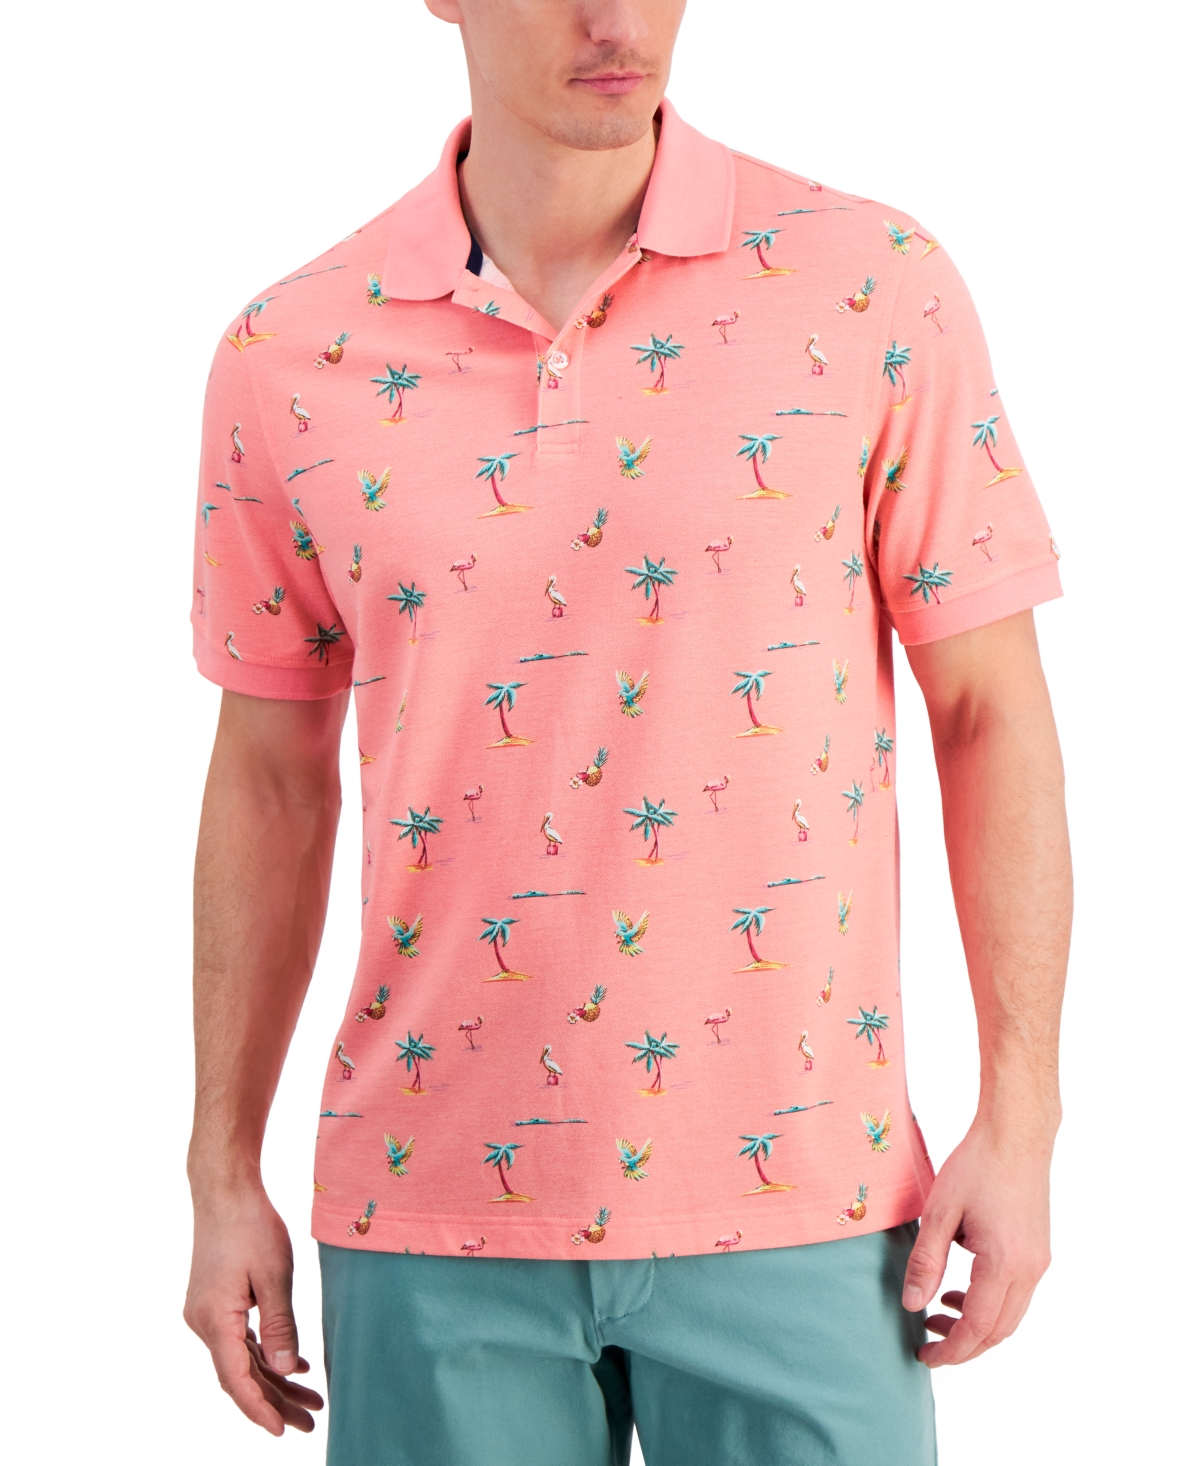 Men's Textured Short Sleeve Florida Life Print Performance Polo Shirt, Created for Macy's - Coral Cream